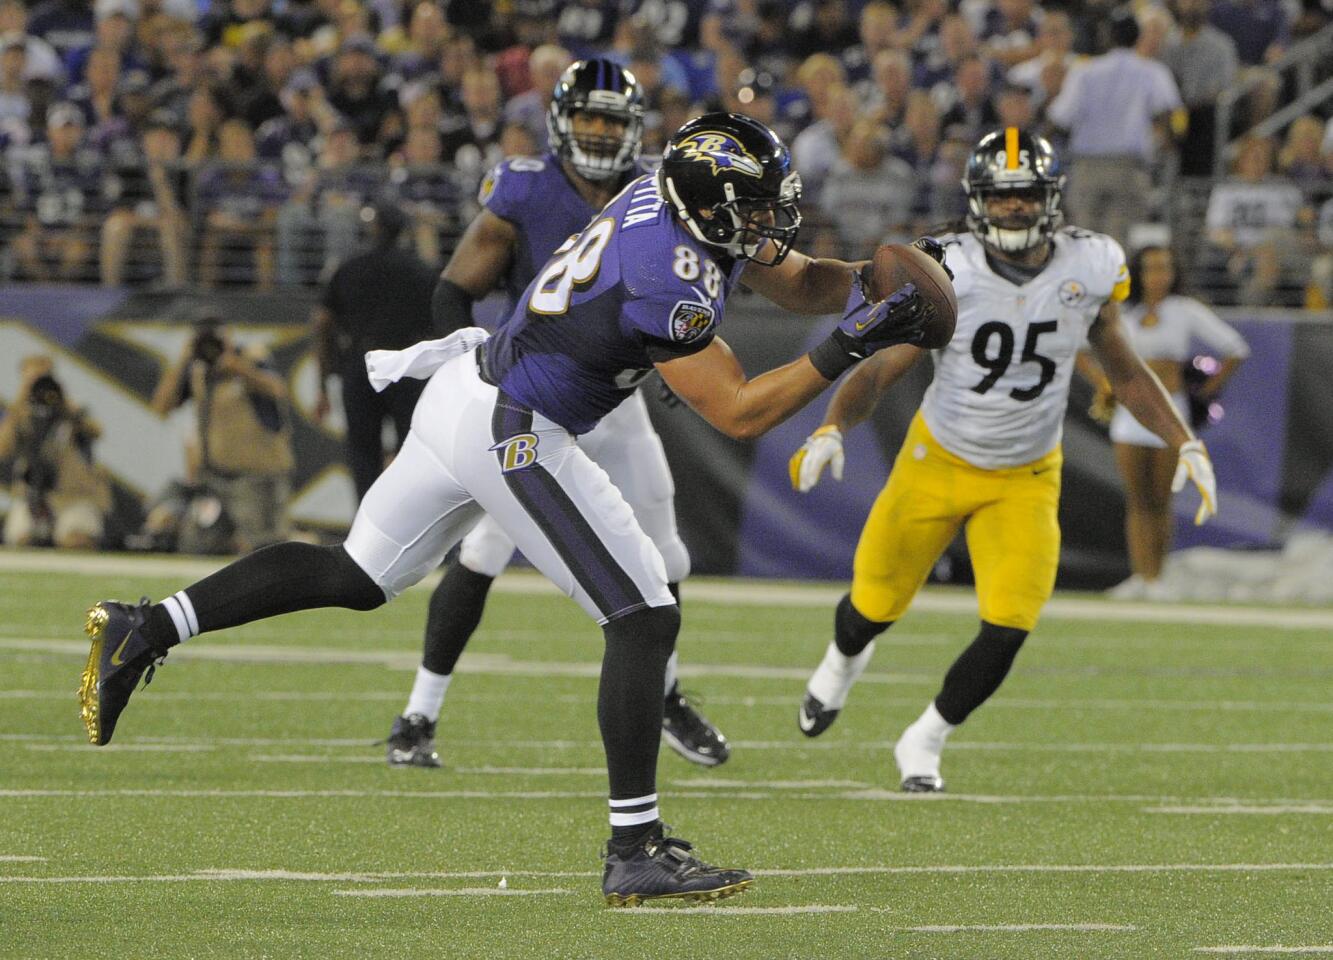 Through two weeks, the Ravens passing game has centered around wide receiver Steve Smith and the tight ends, with Smith, Dennis Pitta, and Owen Daniels combining for 53 of the Ravens' 91 pass targets (nearly 60 percent). Smith has been a revelation and will likely continue to be so, especially if Cleveland's star cornerback, Joe Haden, lines up against Torrey Smith. Daniels was the primary red zone target last Thursday against Pittsburgh, but expect that to change. I think Pitta leads the team in both catches and touchdowns as quarterback Joe Flacco continues to get into a rhythm and works the underneath passing game as offensive coordinator Gary Kubiak wants him to. The Browns held Steelers tight end Heath Miller to three catches for 26 yards in Week 1, but Saints tight end Jimmy Graham ripped the Cleveland defense for 10 catches for 118 yards and a pair of scores last week. Sure, Graham is the best tight end on the planet, but he may have exposed a weakness for the Ravens to take advantage of. The Ravens have basically lived in two-tight end sets through the first two weeks, which for most teams would be a run formation. The Ravens are more than willing to throw out of it, though, and if the Browns don't have a linebacker that can run with and cover Pitta, he's a prime candidate to lead the offense.